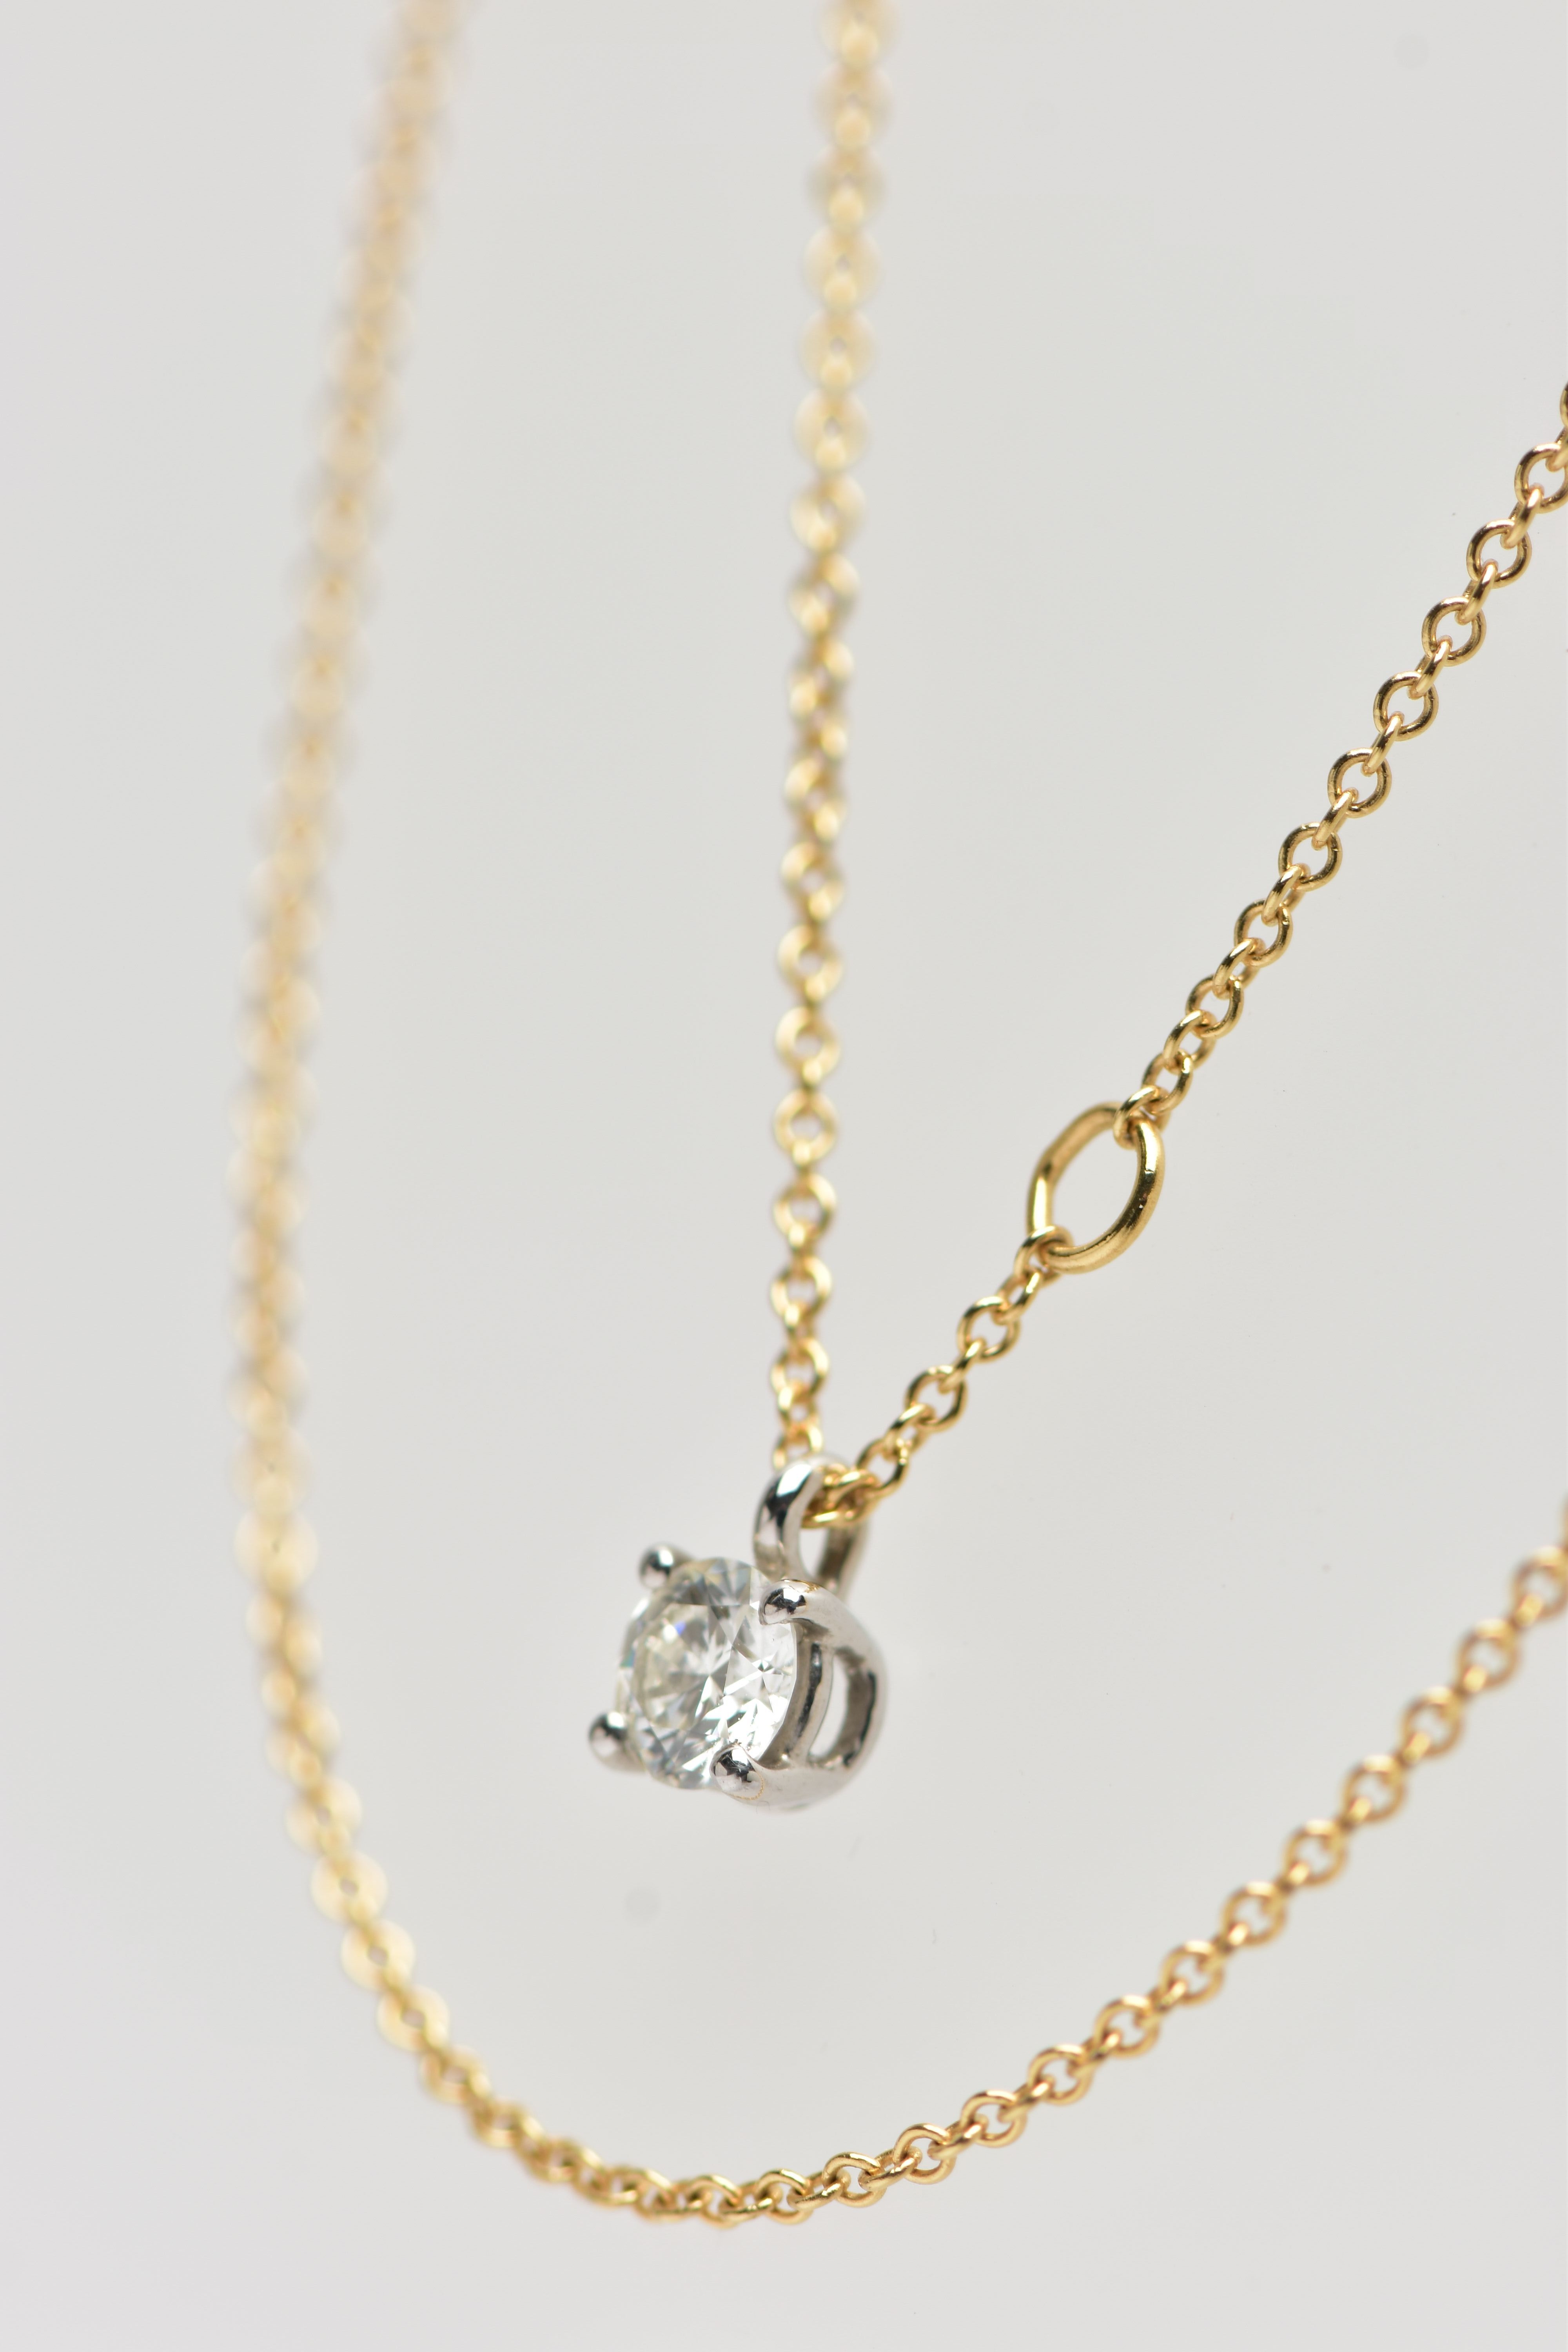 AN 18CT YELLOW AND WHITE GOLD TIFFANY & CO DIAMOND PENDANT NECKLACE, set with a round brilliant - Image 6 of 6